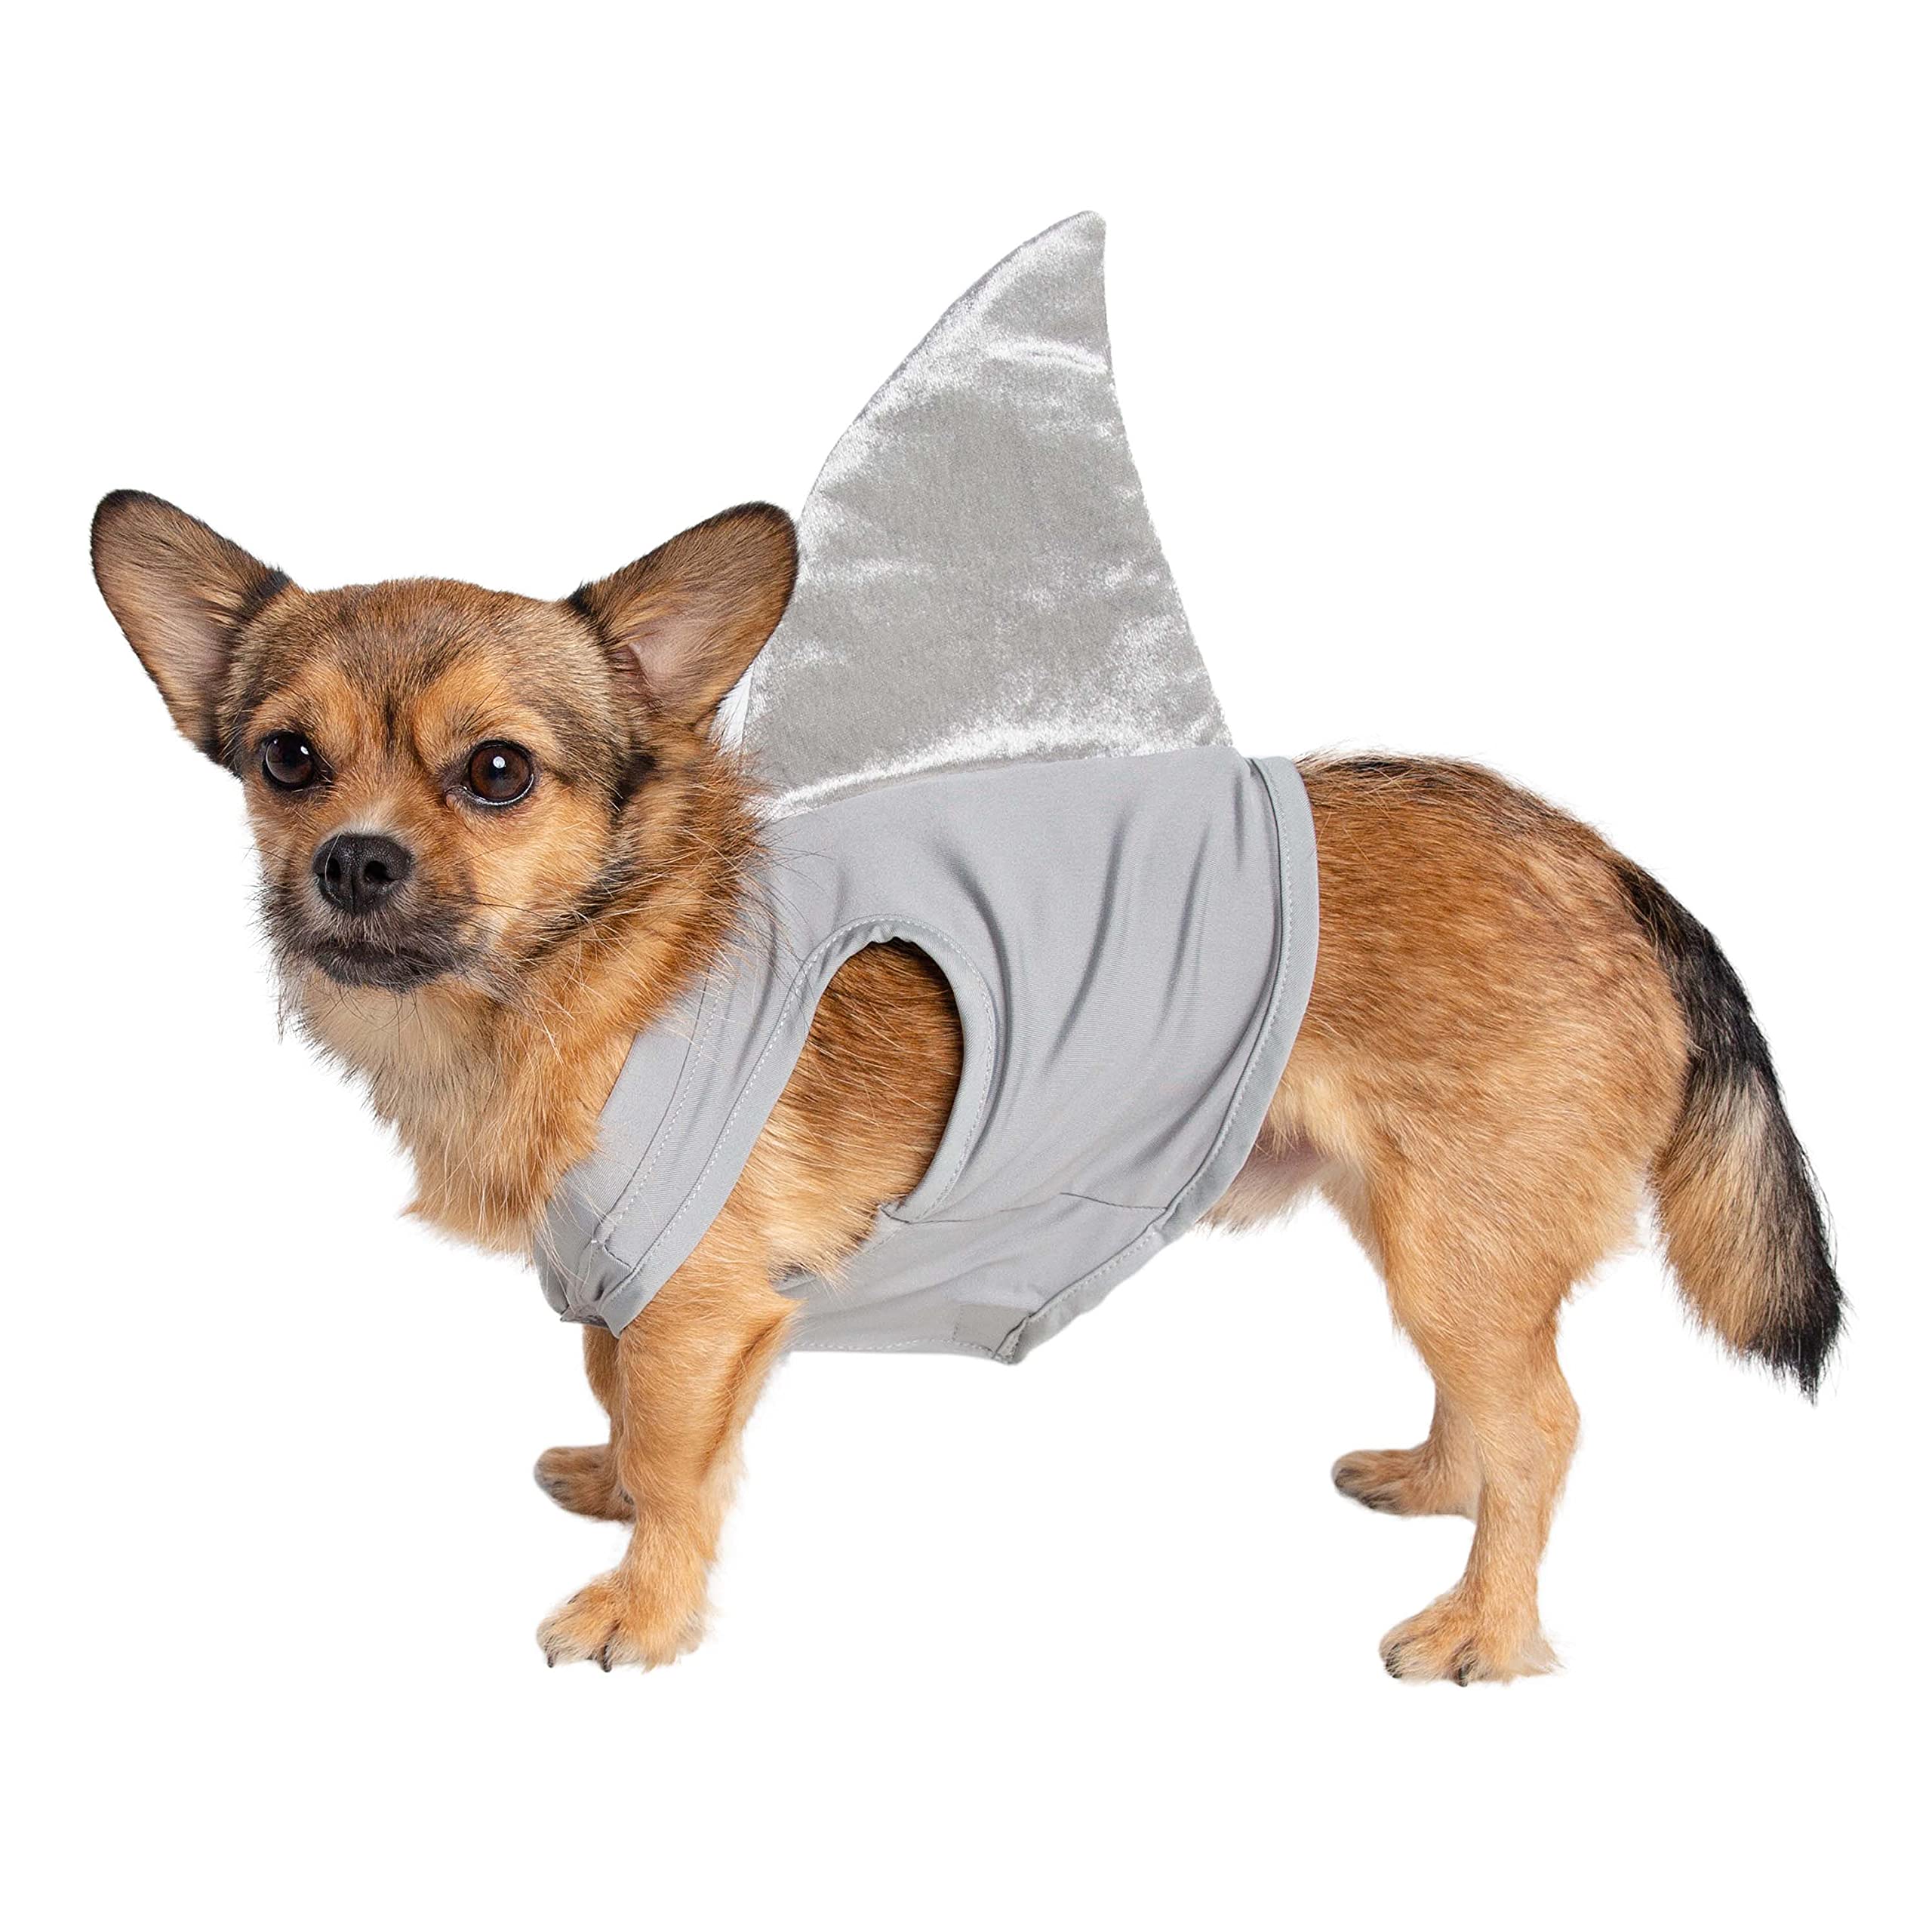 Pet Krewe Dog Shark Costume | Pet Costume for Dogs 1st Birthday, National Cat Day & Celebrations | Halloween Outfit for Small and Large Cats & Dogs  - Like New